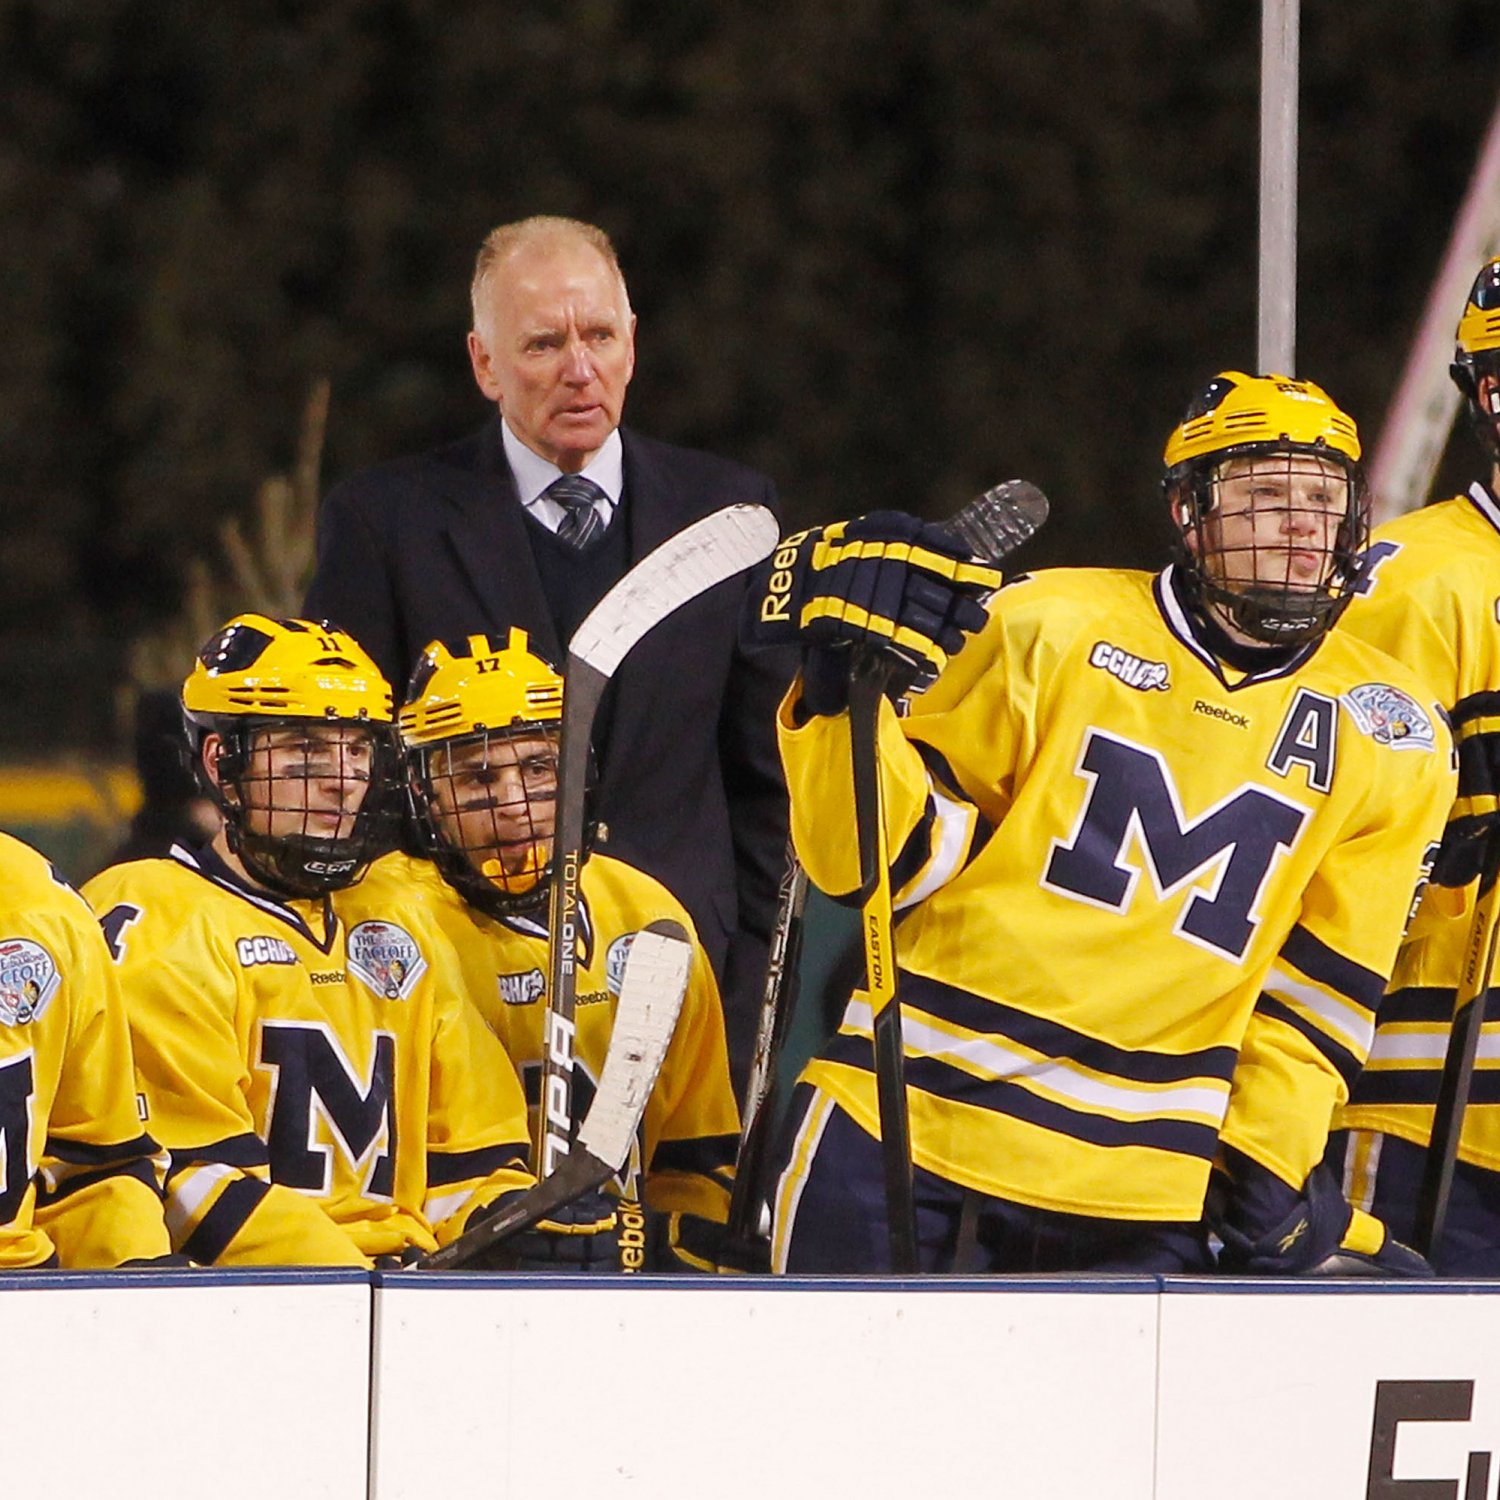 Michigan Hockey Schedule 201415 List of Games, Season Preview for